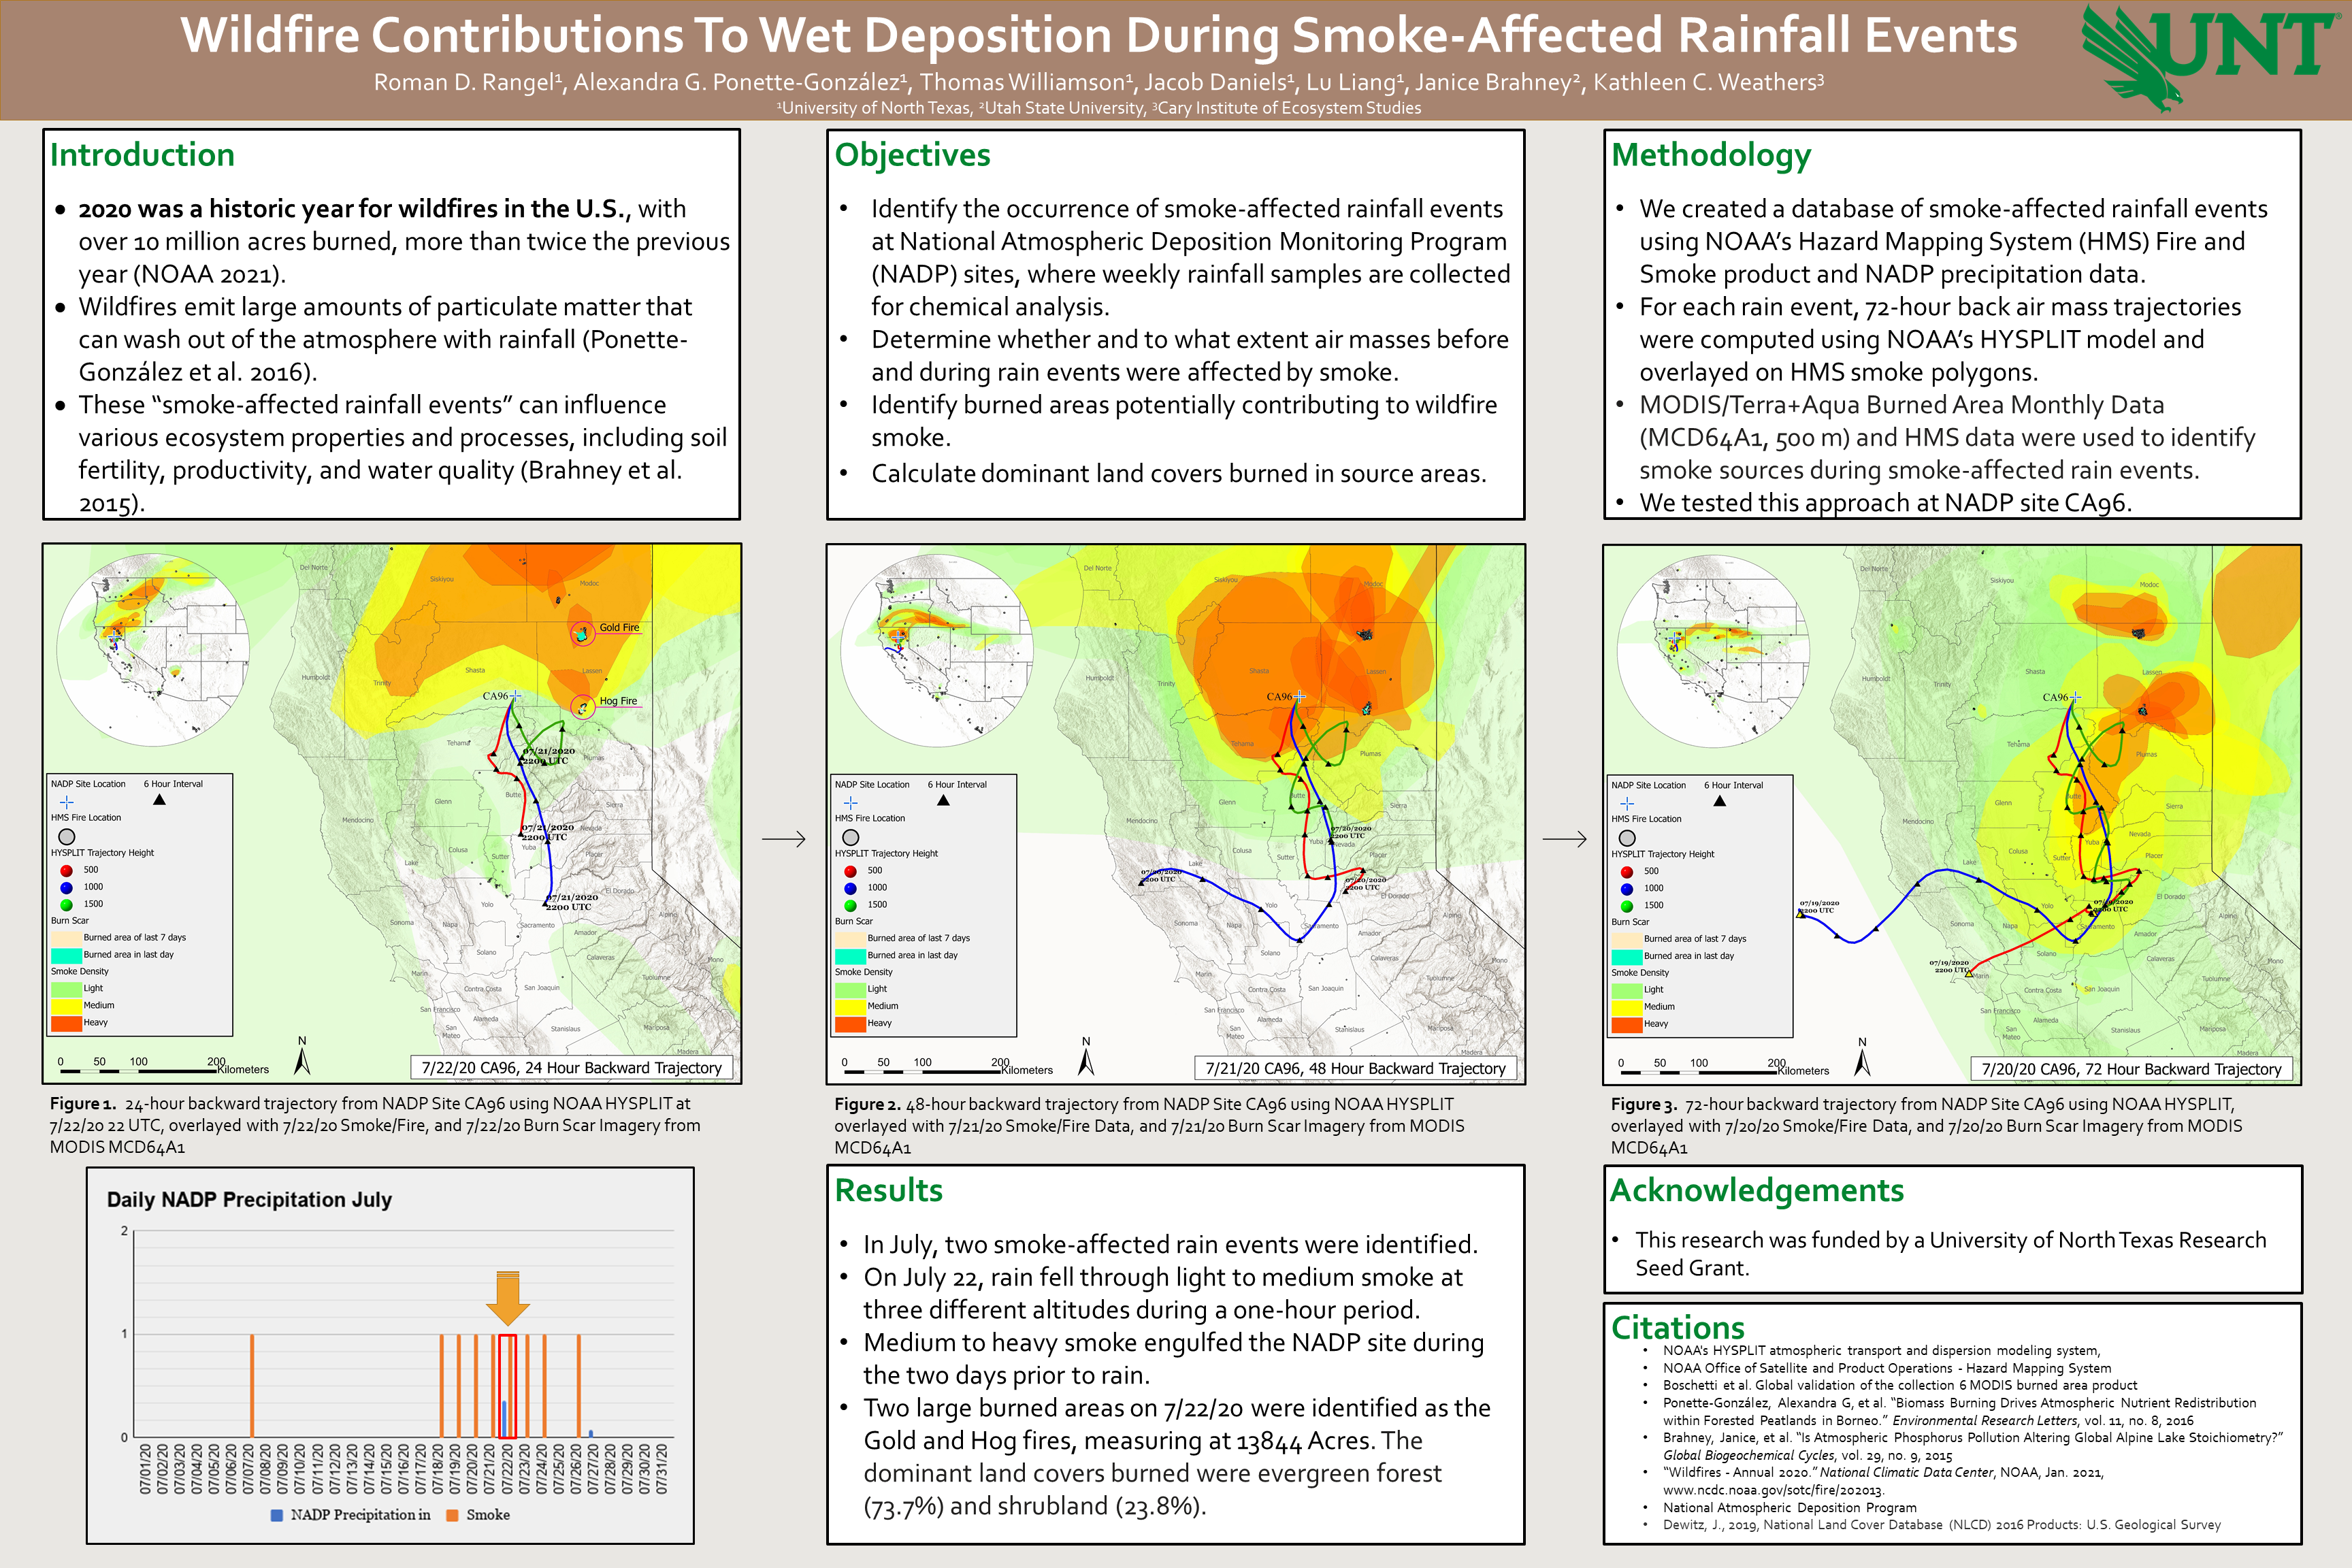 Wildfire Contributions To Wet Deposition During Smoke-Affected Rainfall Events